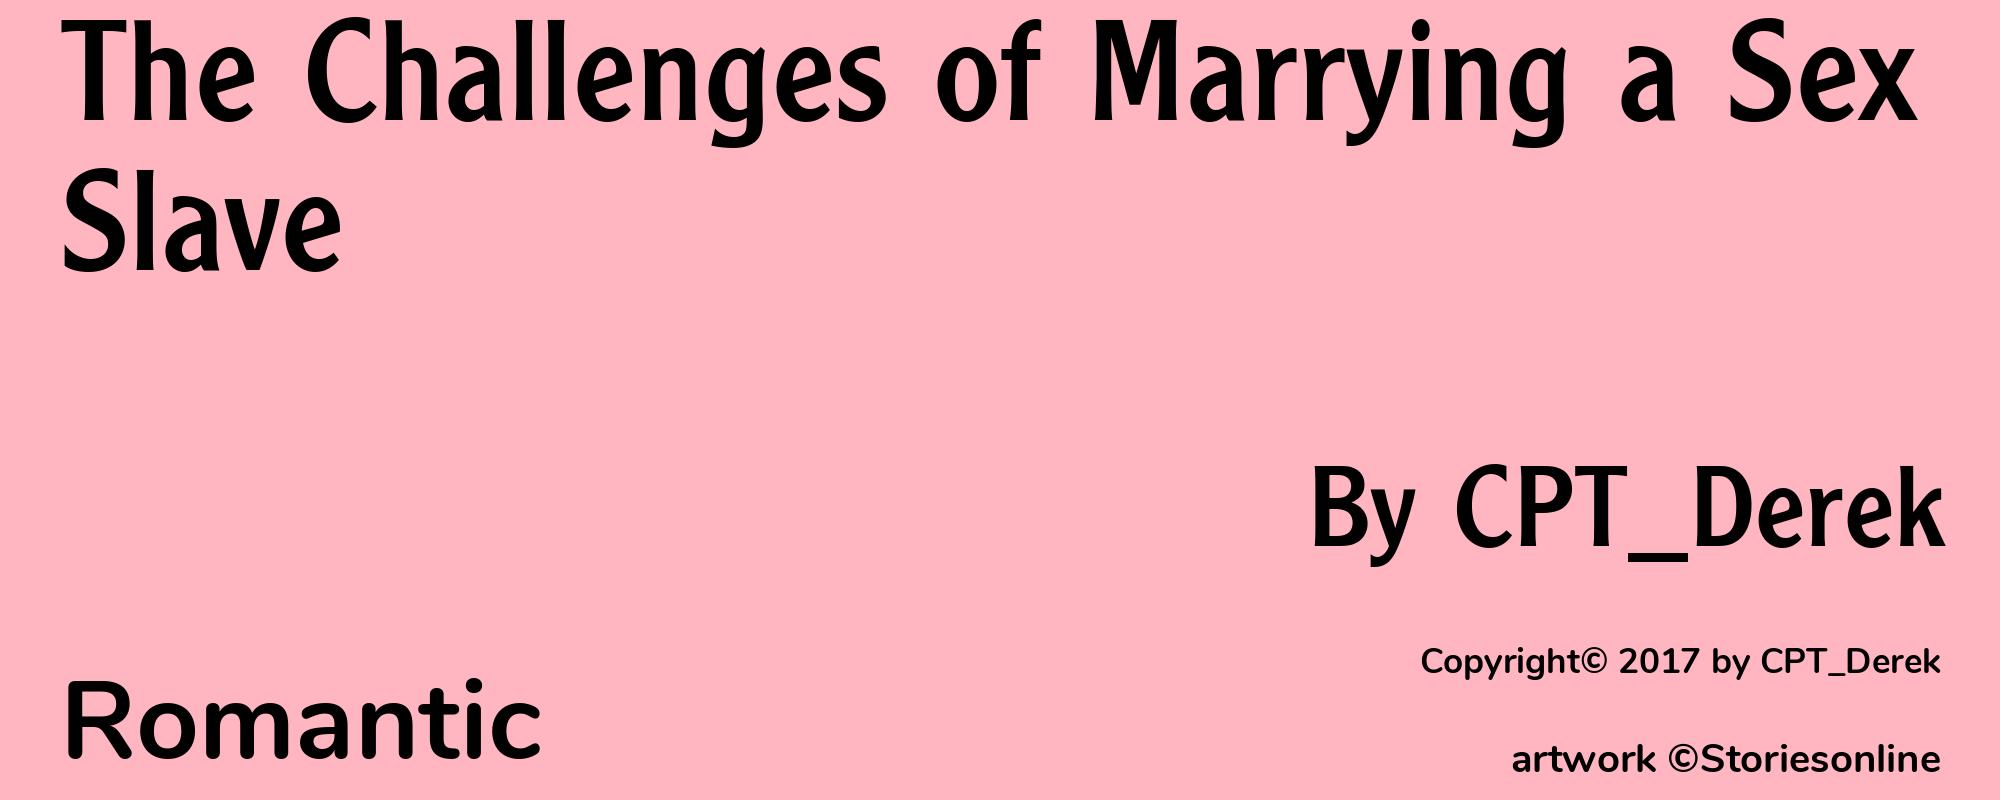 The Challenges of Marrying a Sex Slave - Cover